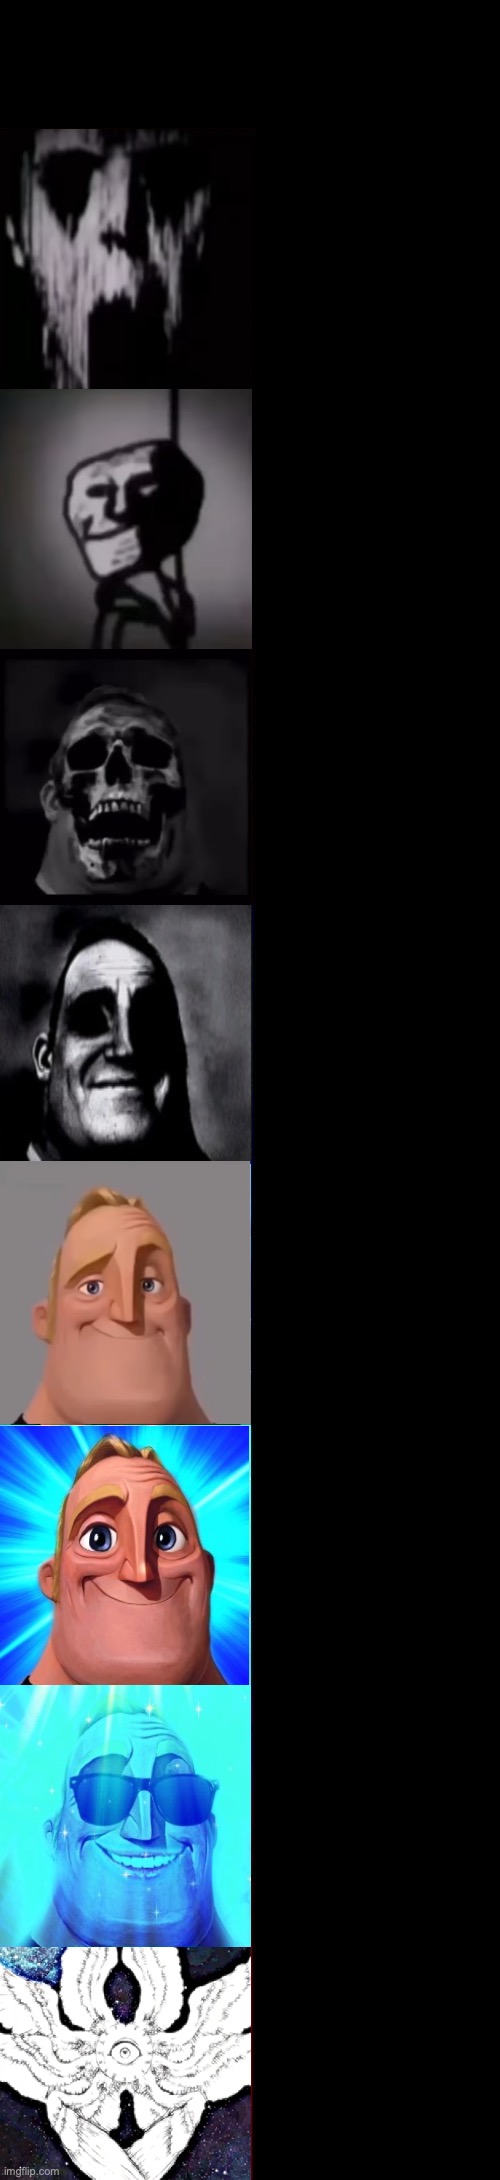 mr-incredible-becoming-uncanny-to-canny-8-panel-blank-template-imgflip